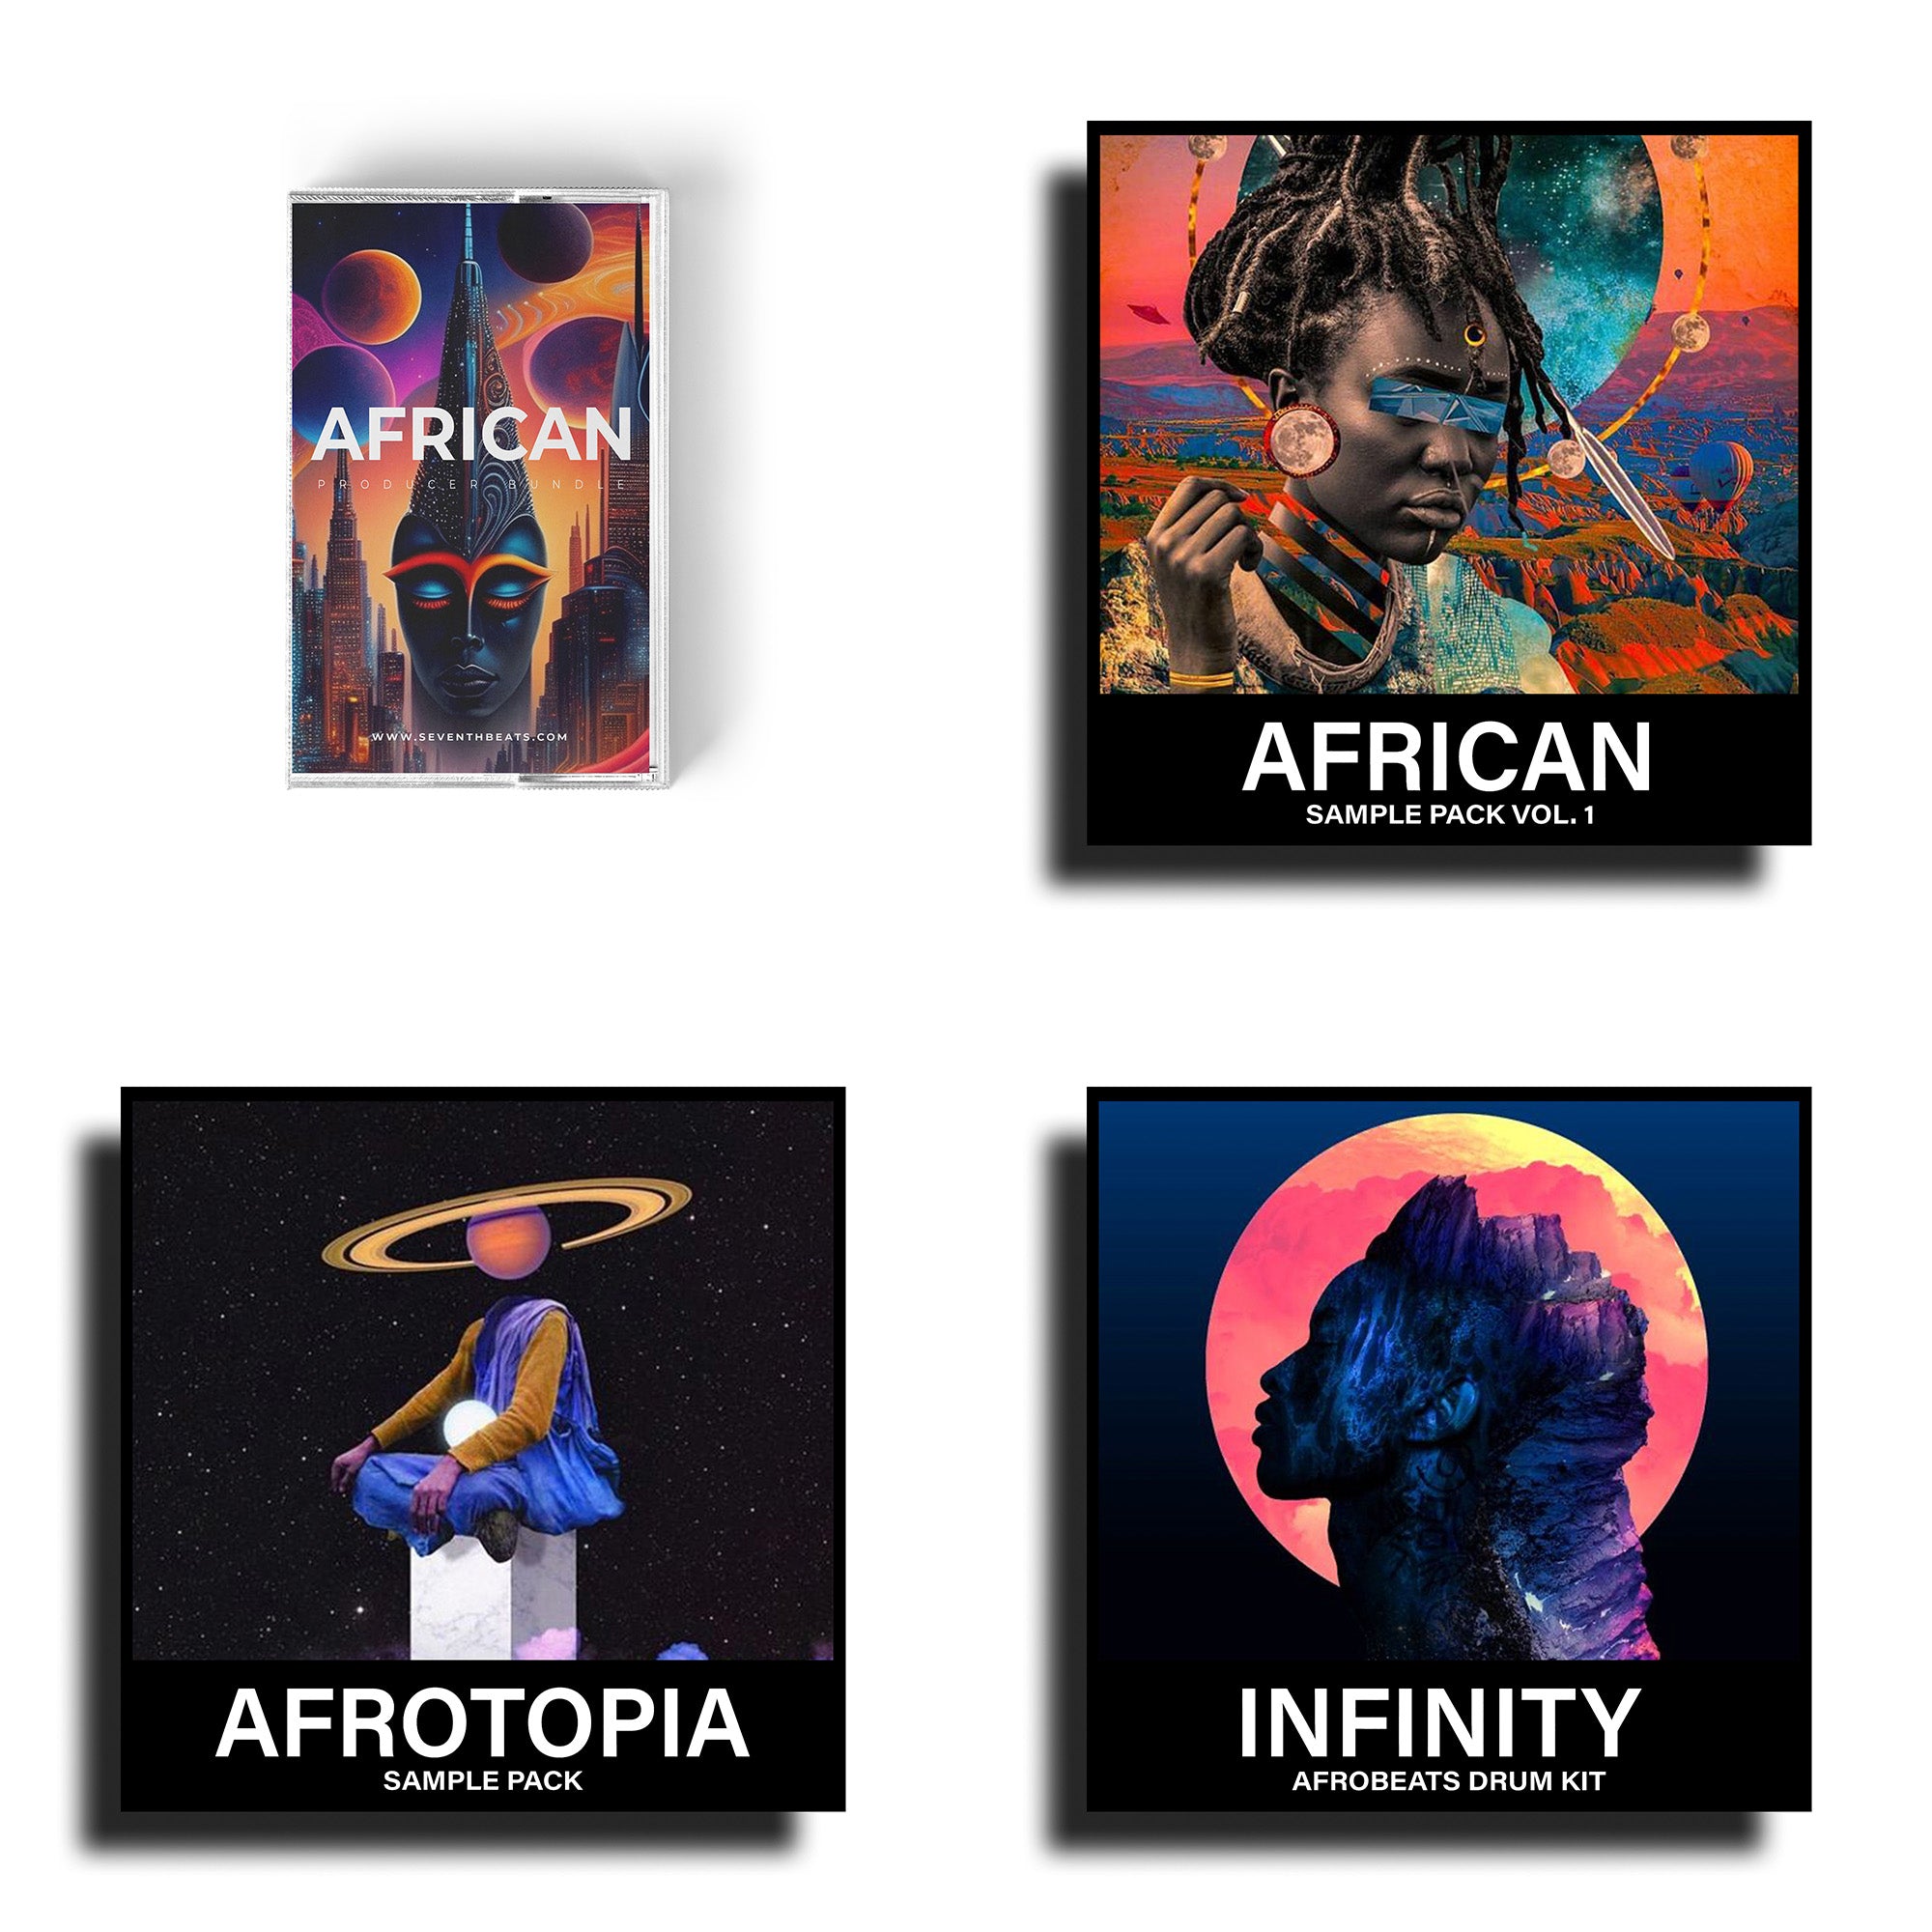 The Afrobeat Collection